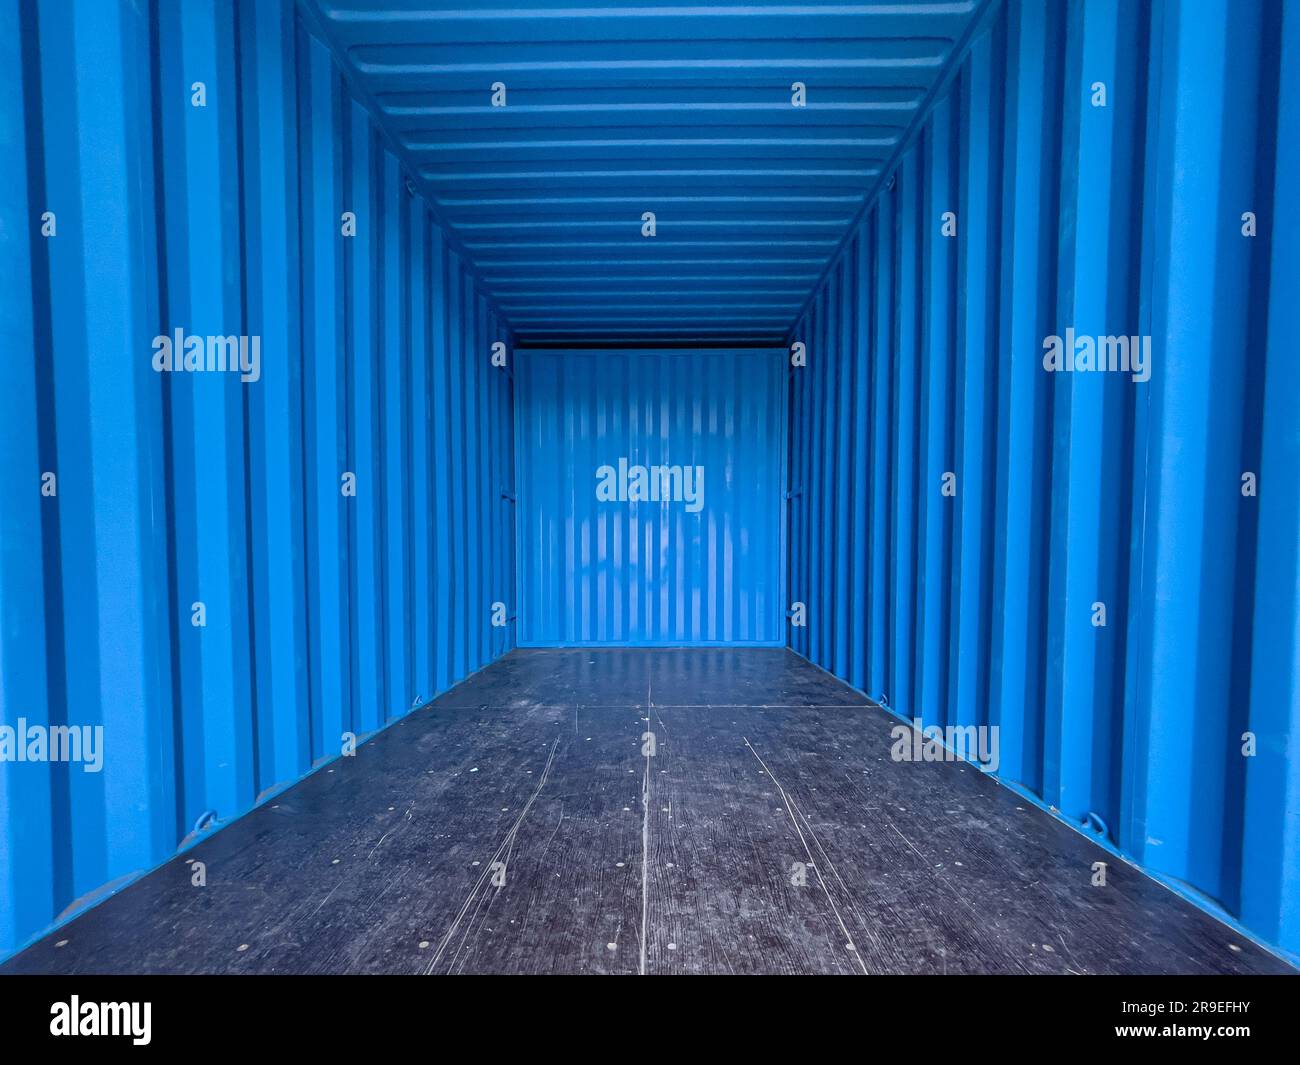 Blue interior of an empty metal shipping container. Shot from the entrance looking inwards Stock Photo